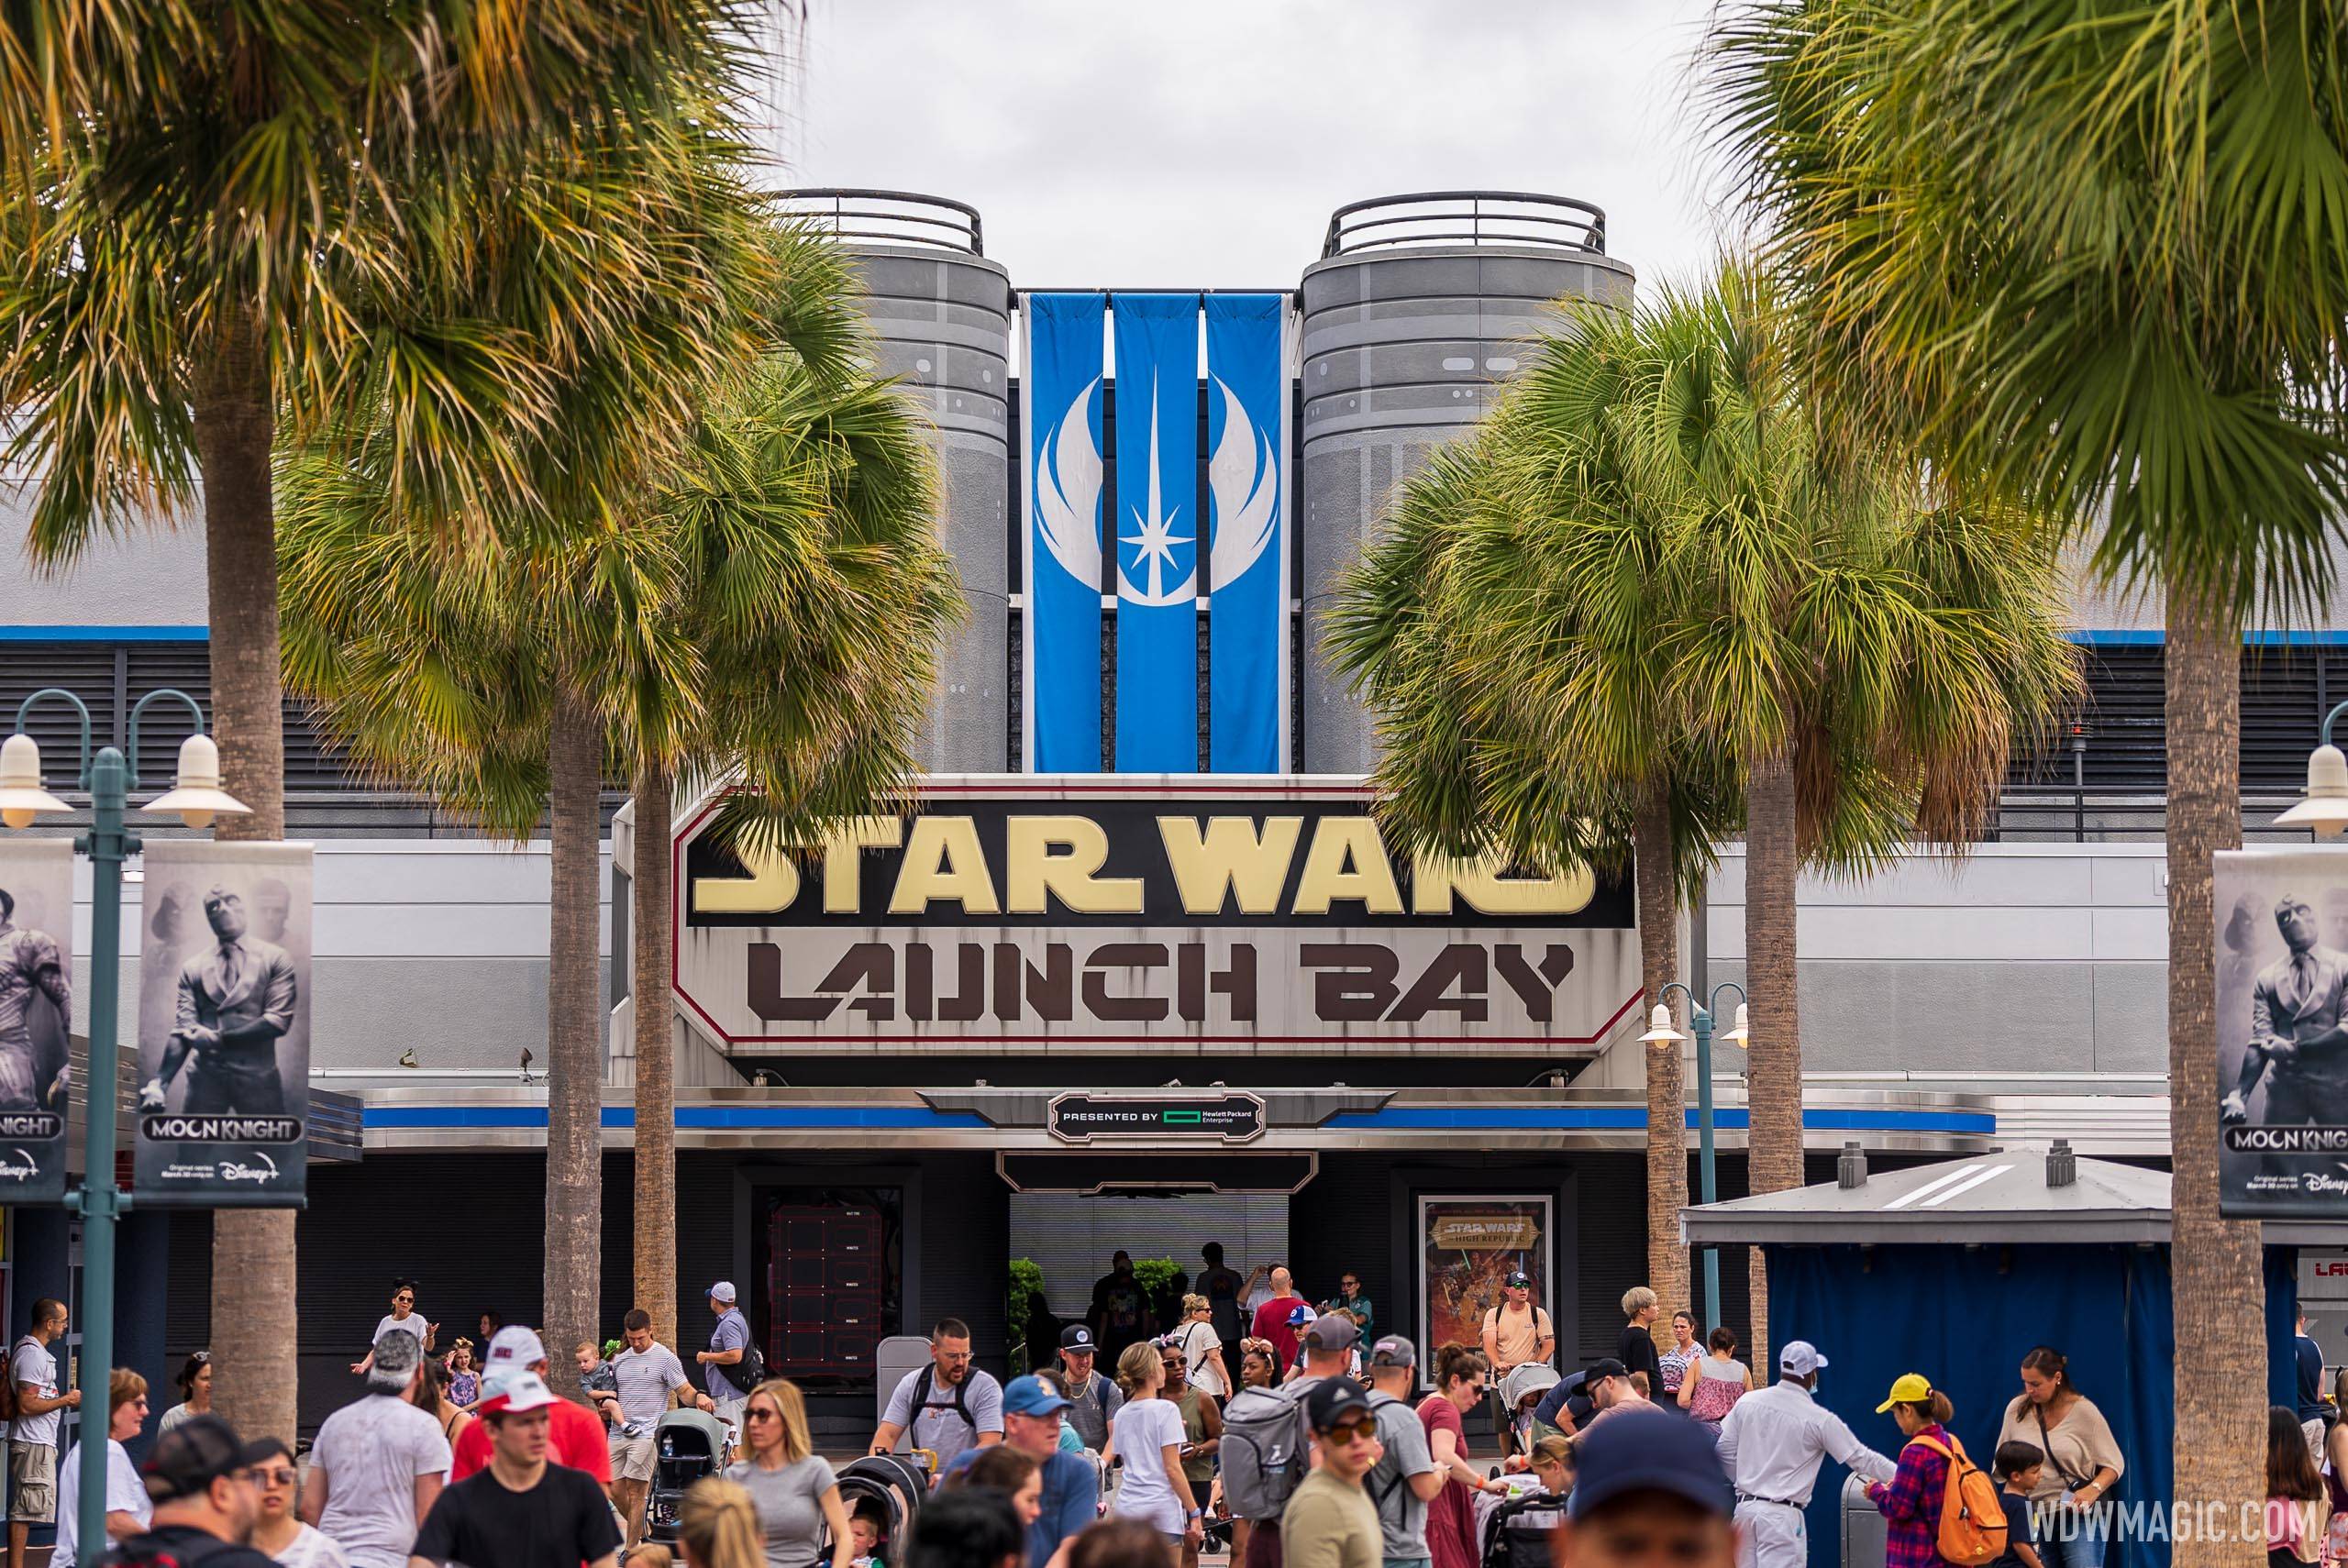 Launch Bay is expected to be the next re-Imagining project at Disney's Hollywood Studios